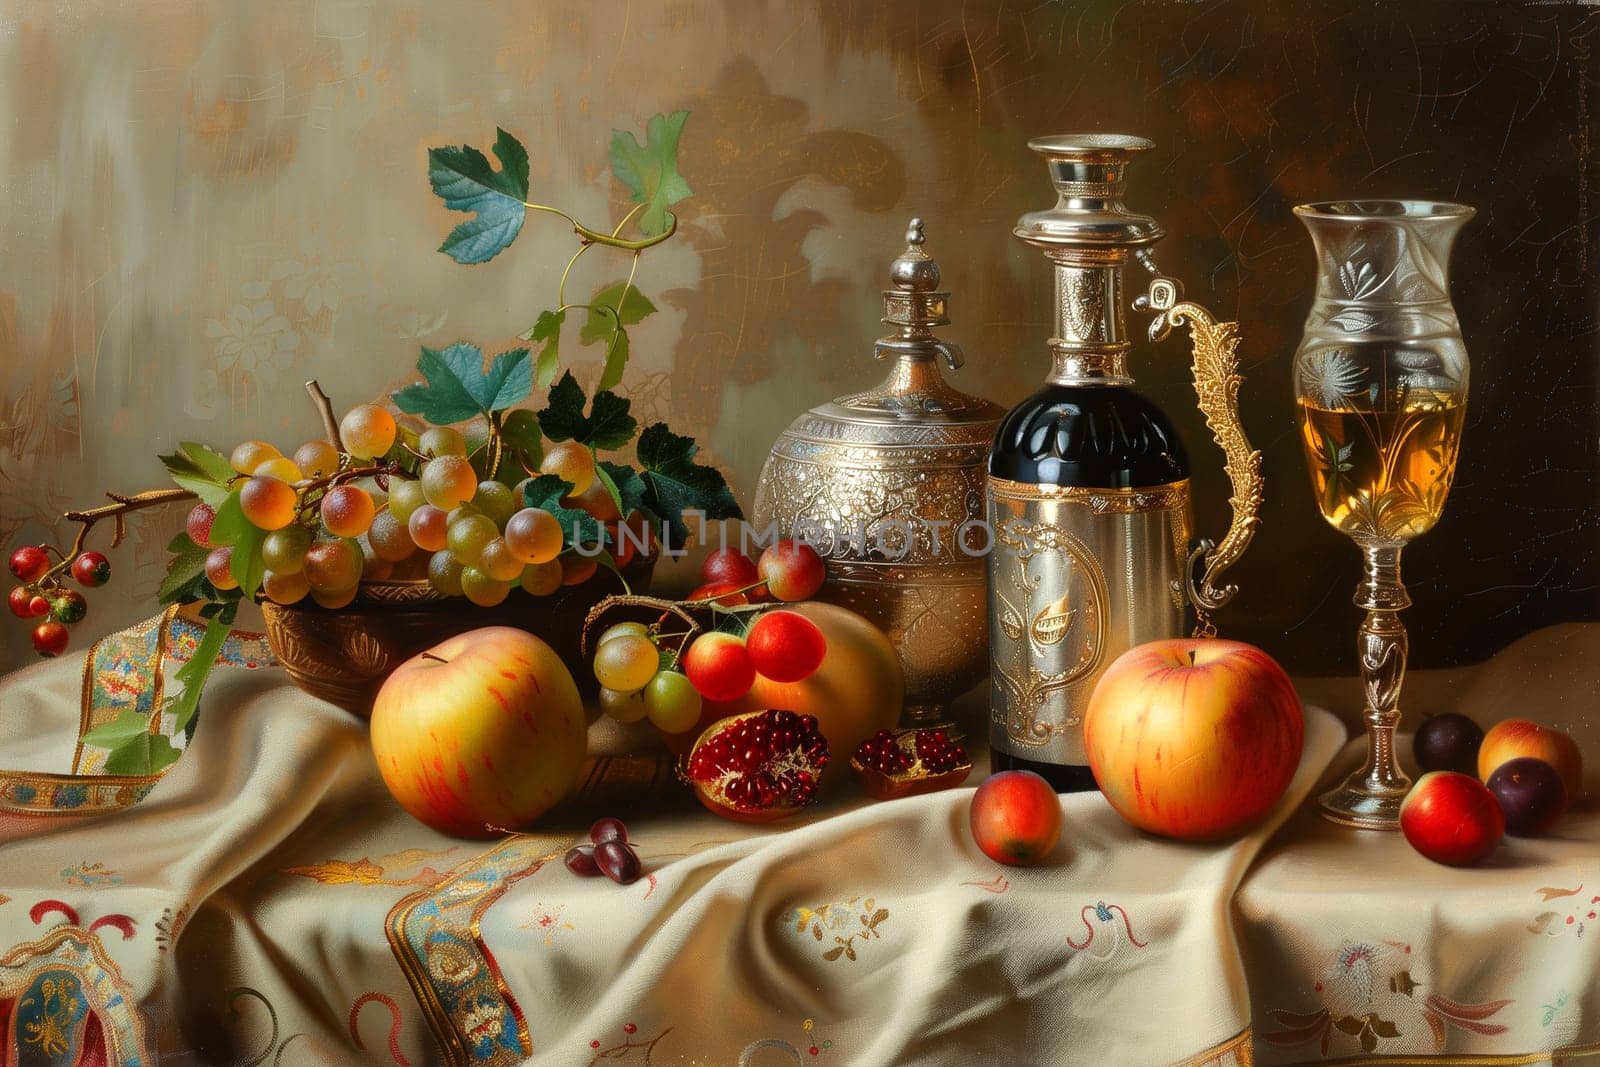 Traditional Shavuot Still Life With Fruits, Wine, and Decorative Objects by Sd28DimoN_1976